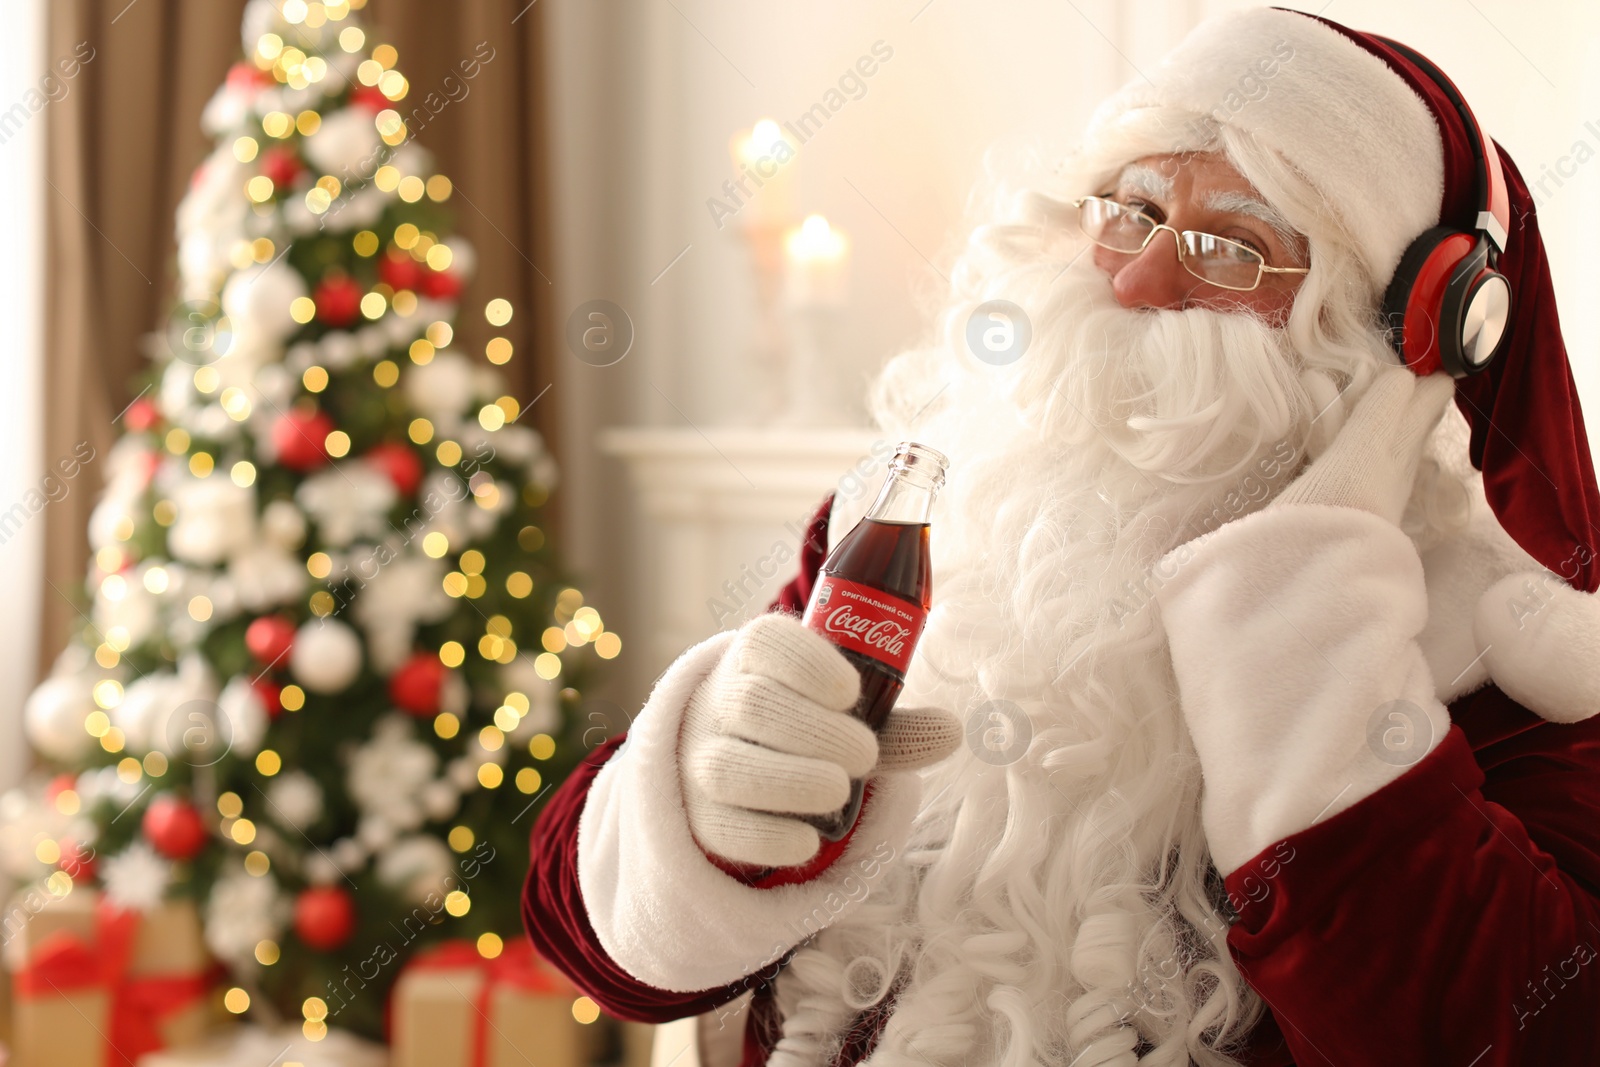 Photo of MYKOLAIV, UKRAINE - JANUARY 18, 2021: Santa Claus holding Coca-Cola bottle and listening to music with headphones in room decorated for Christmas